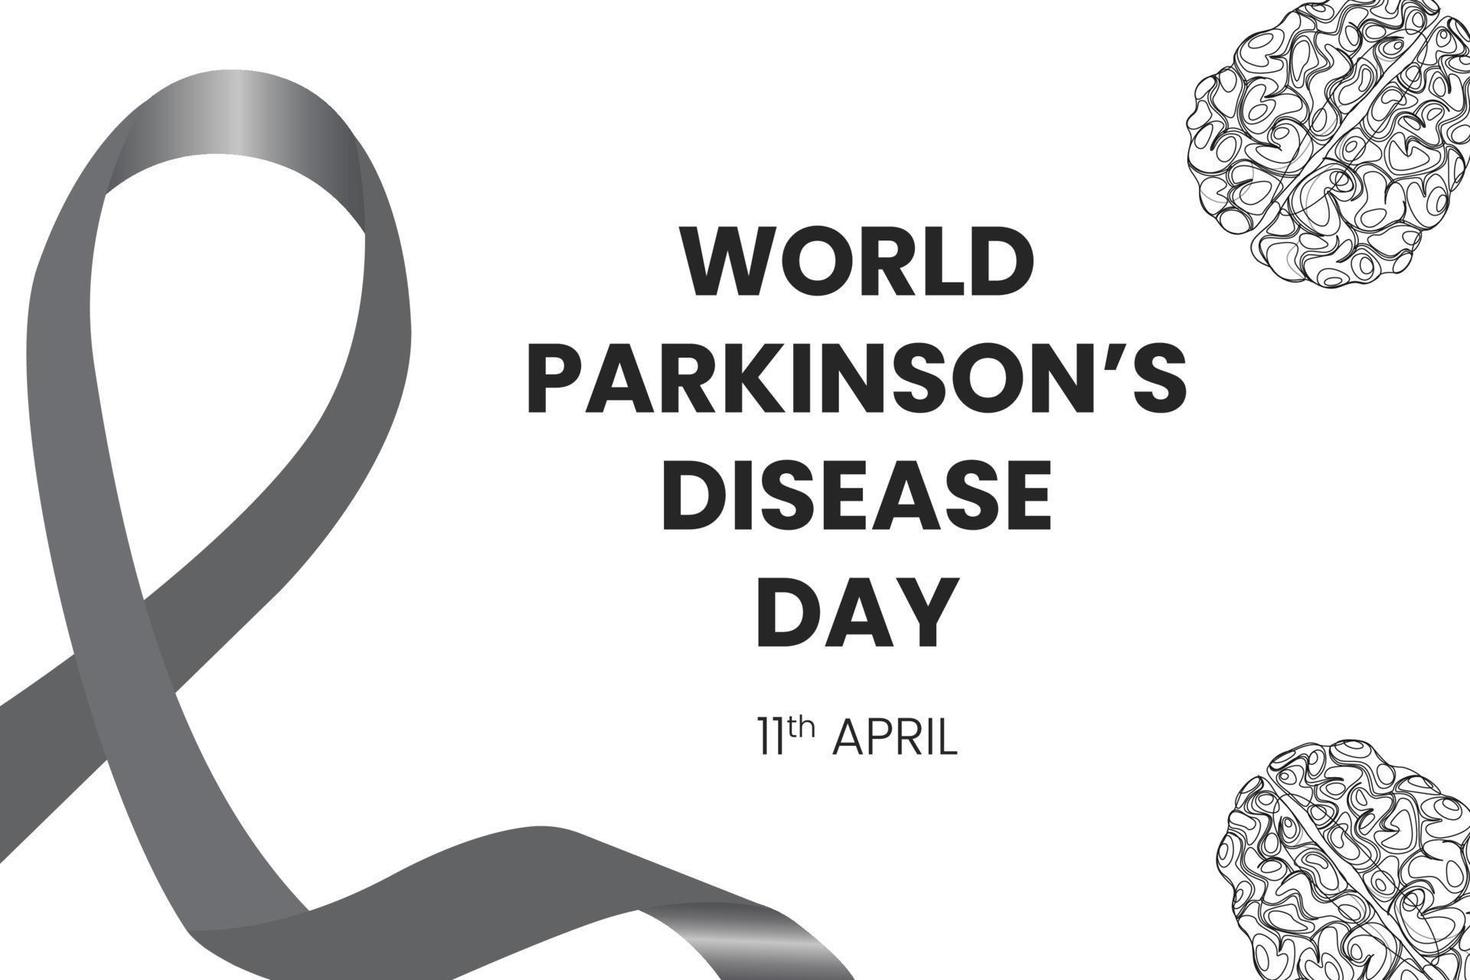 World Parkinson's disease day observed on April 11th every year. Template for background, banner, card, poster with text inscription. Vector EPS10 illustration